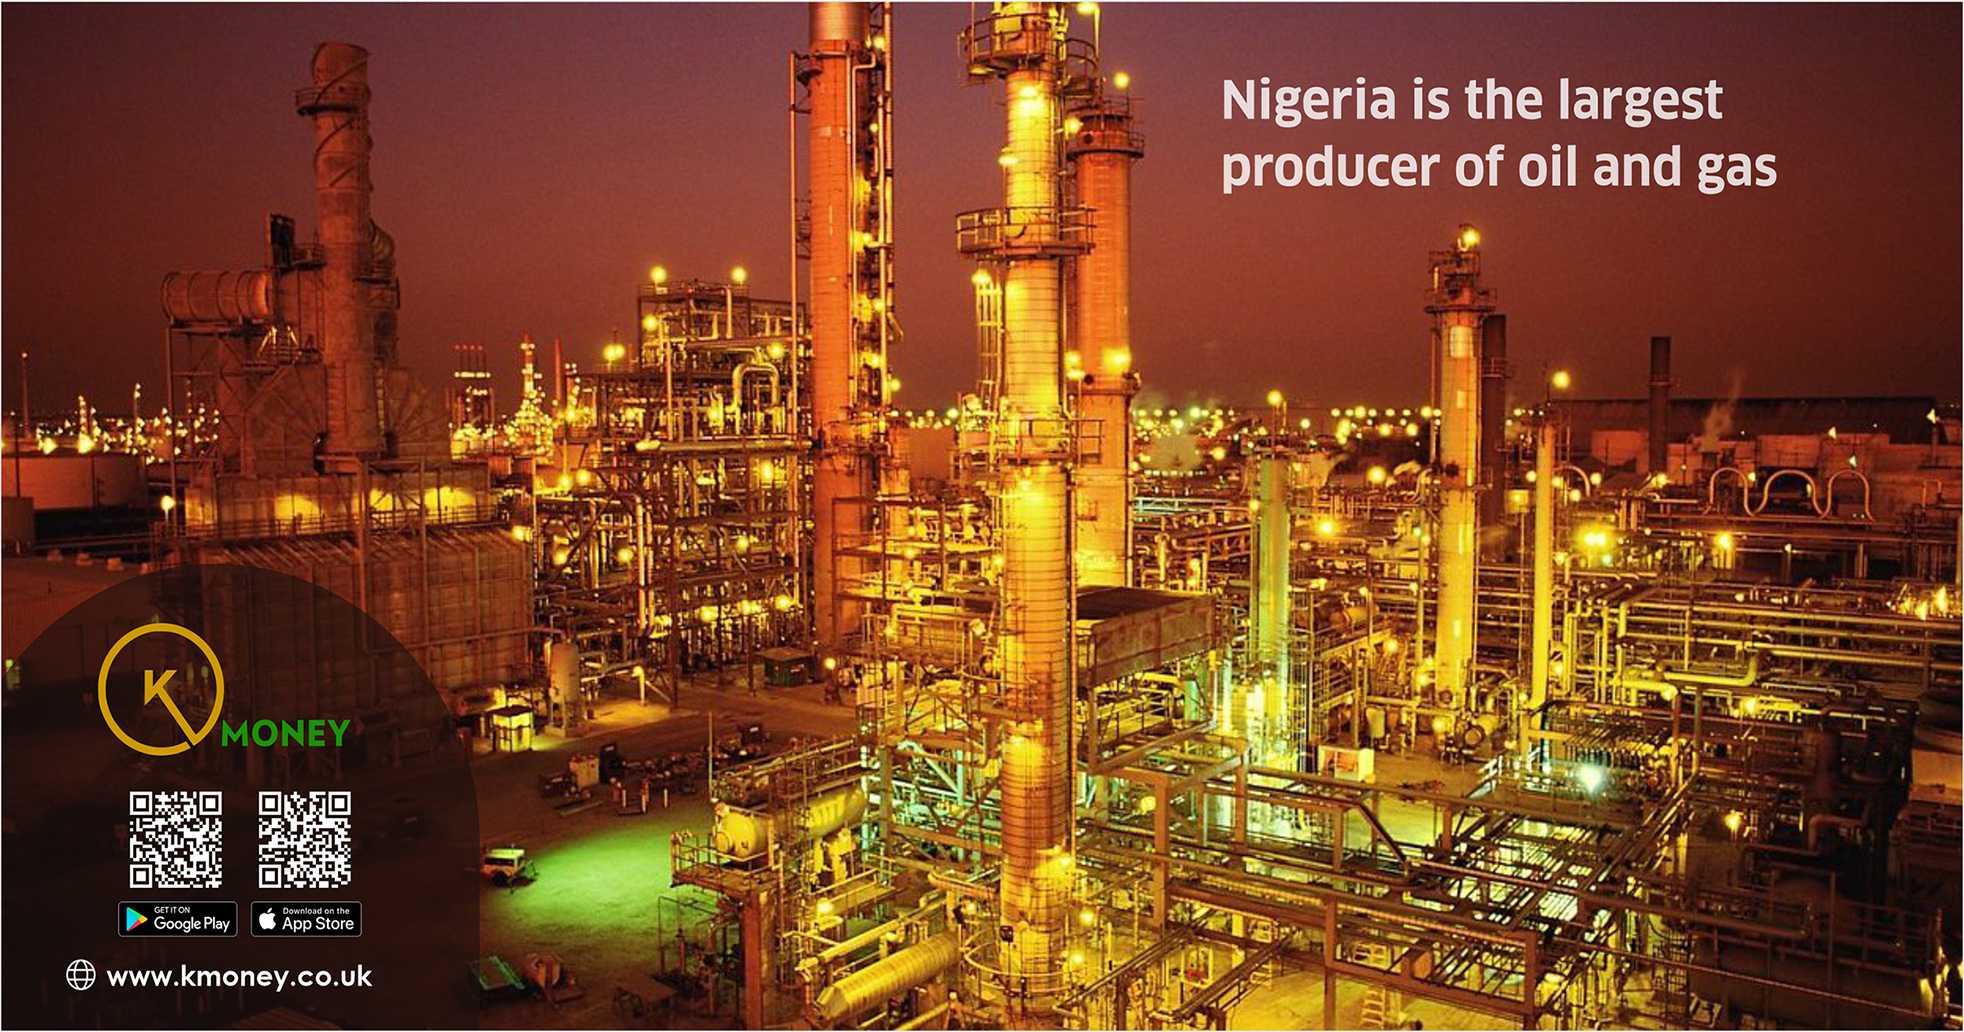 Nigeria is the largest producer of oil and gas